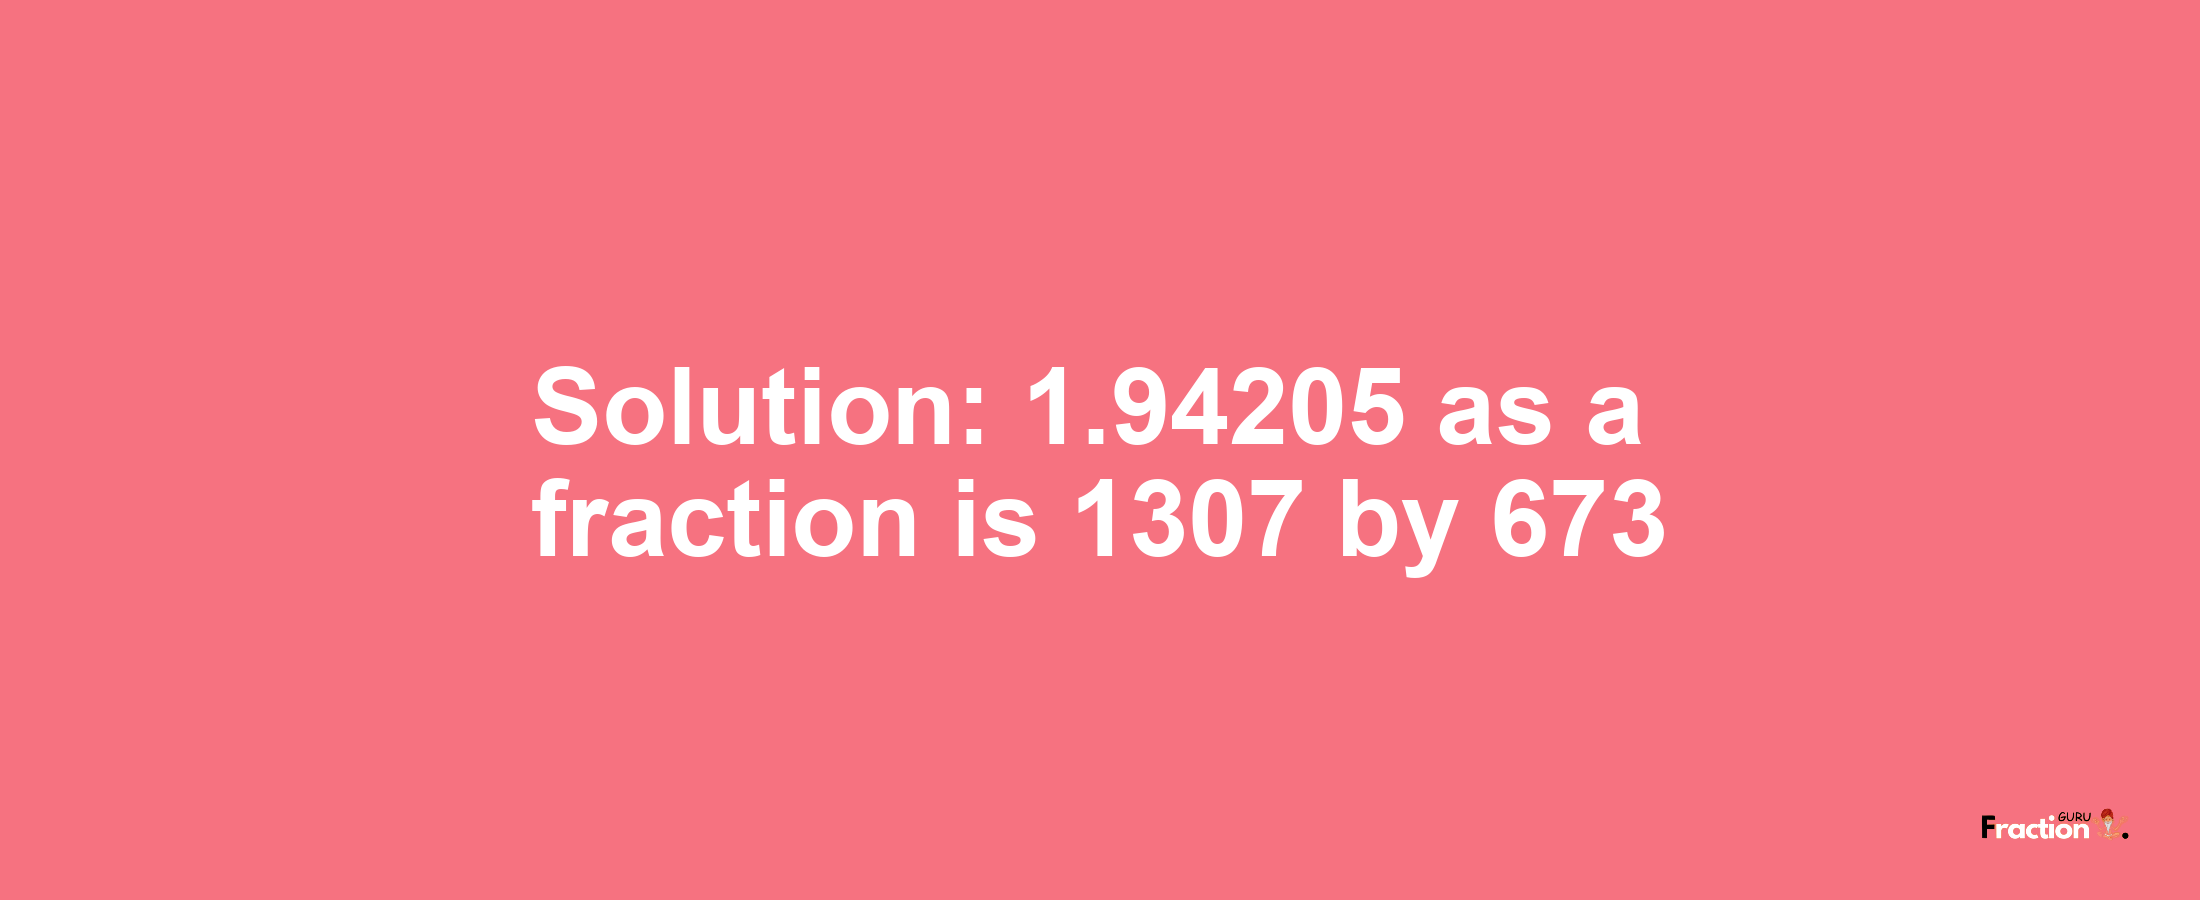 Solution:1.94205 as a fraction is 1307/673